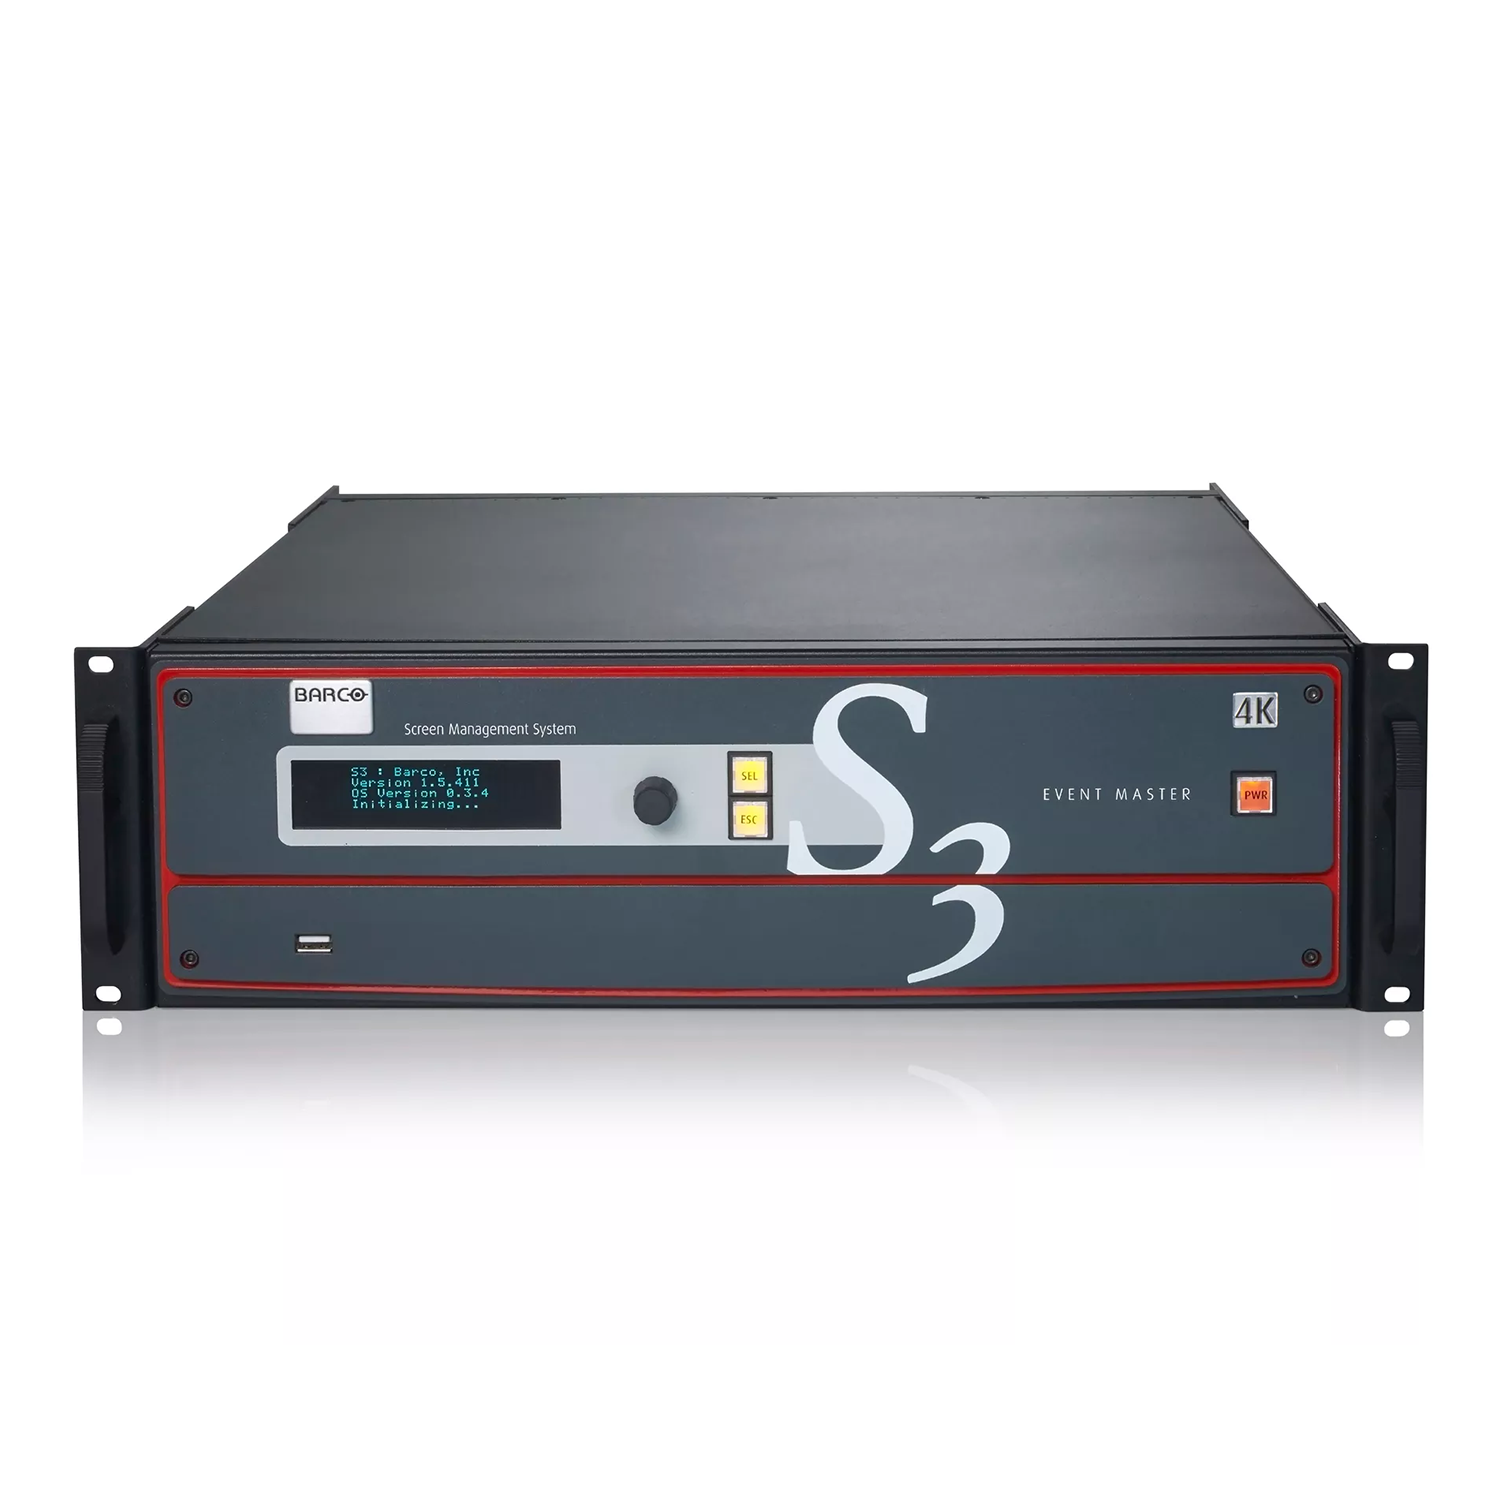 Barco S3-4K Screen Management System